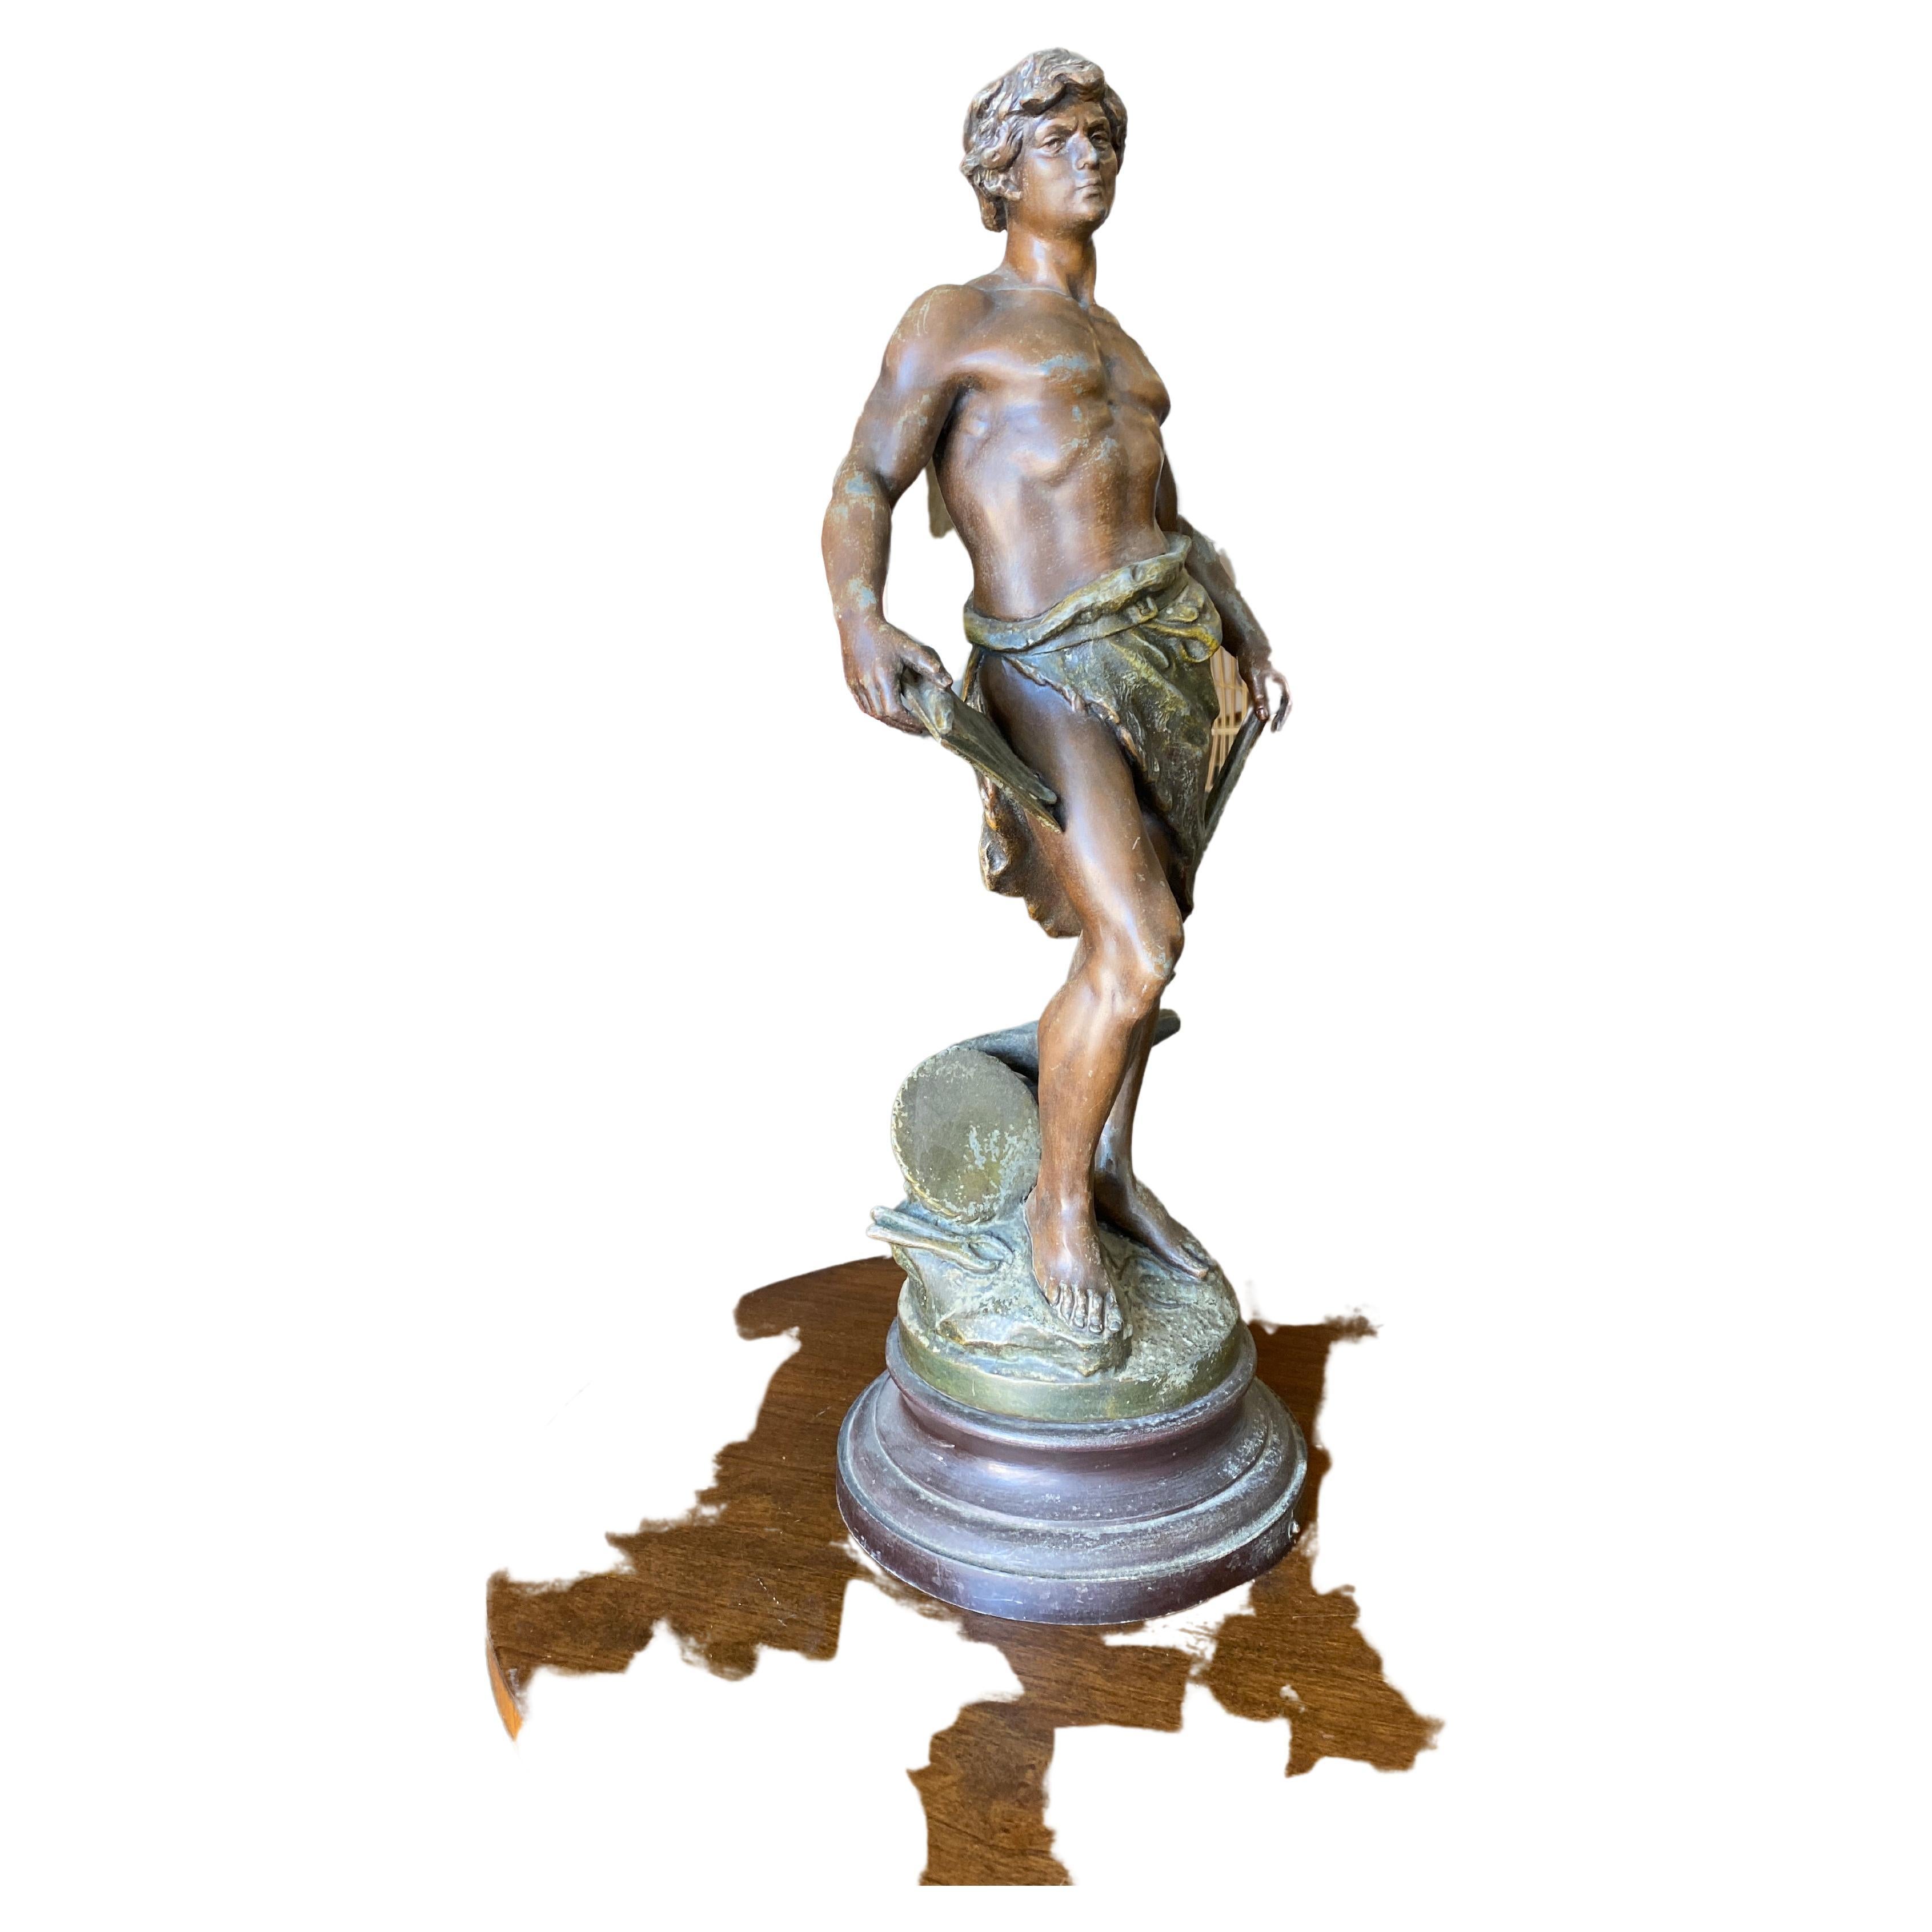 French "Le Travail" Hammership Spelter Sculpture by Francois Moreau, Circa 1900 For Sale